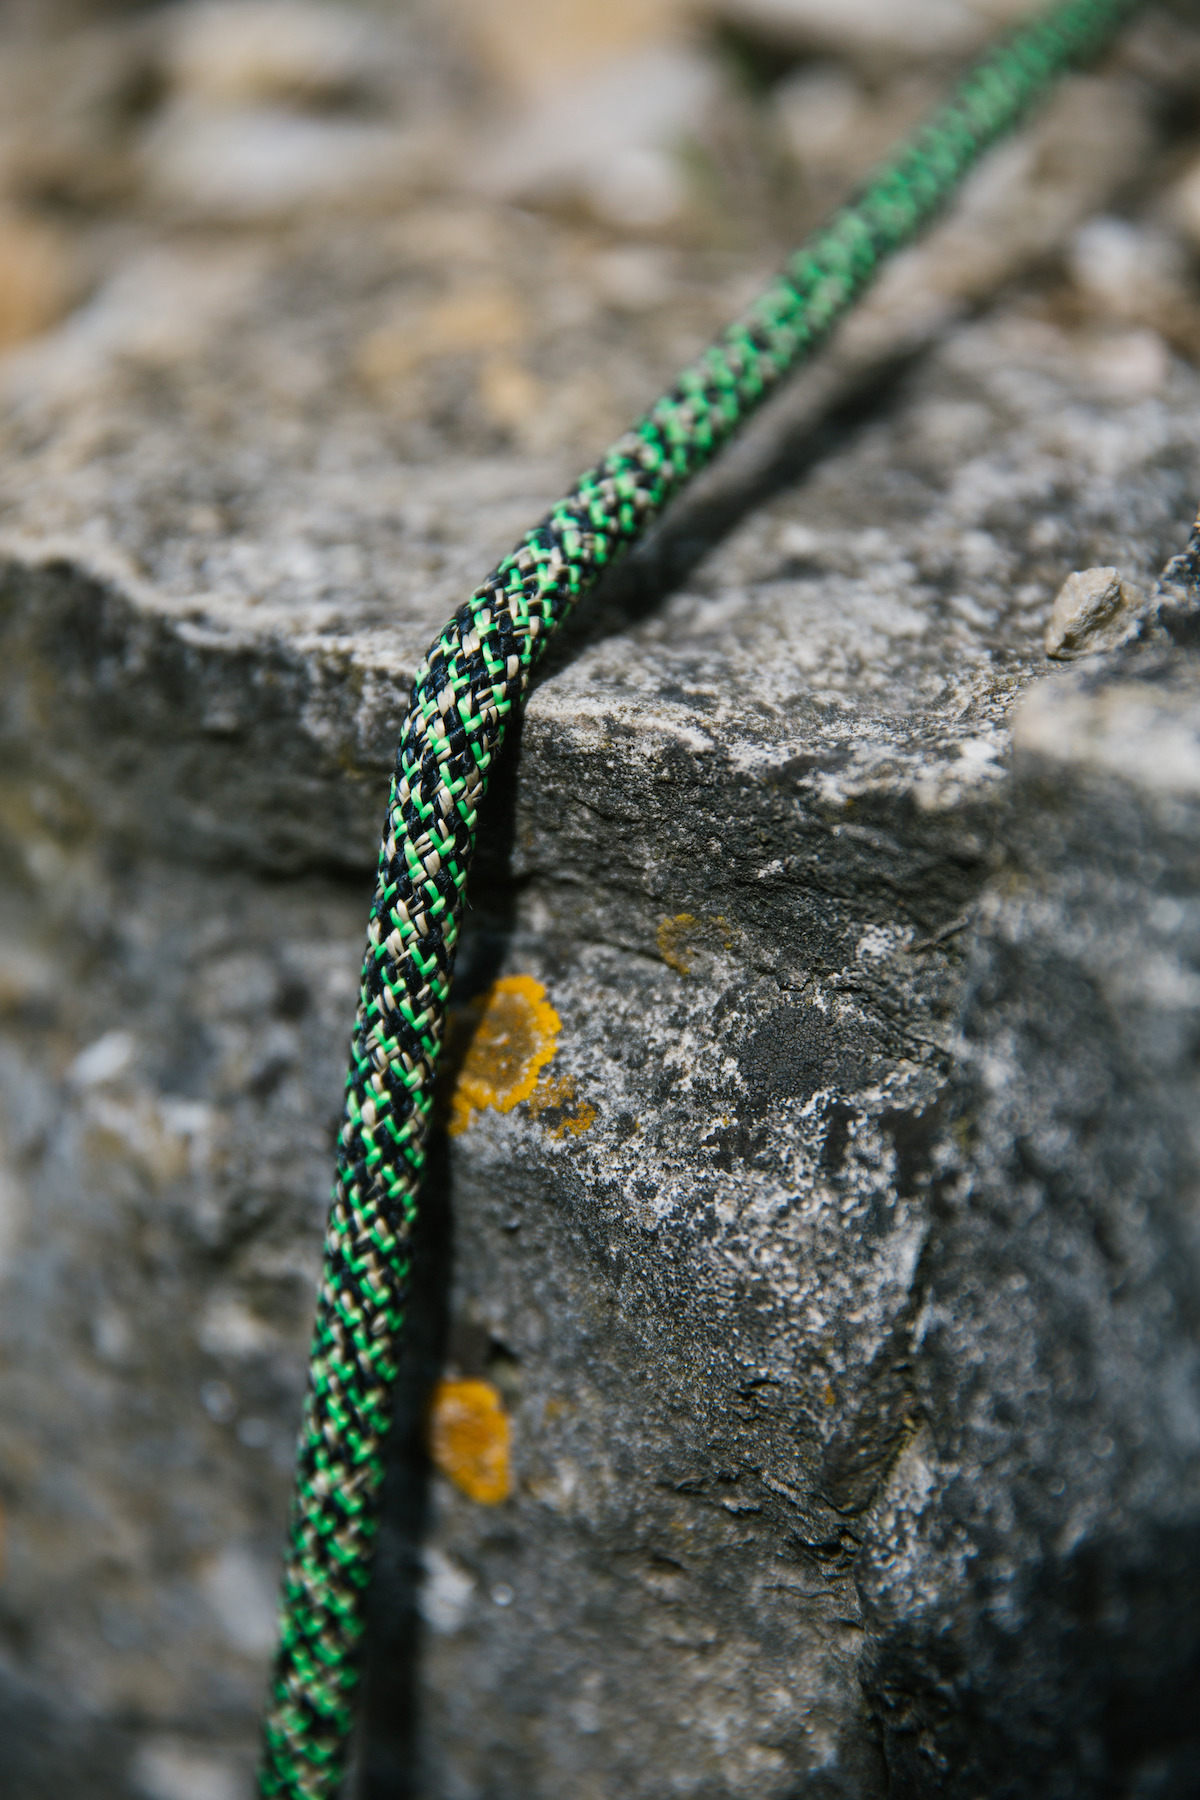 We all dread falling with the rope loaded over an edge. Edelrid’s “Monster” tries to reproduce this type of abrasion/cutting on ropes. [Photo] Courtesy of Edelrid